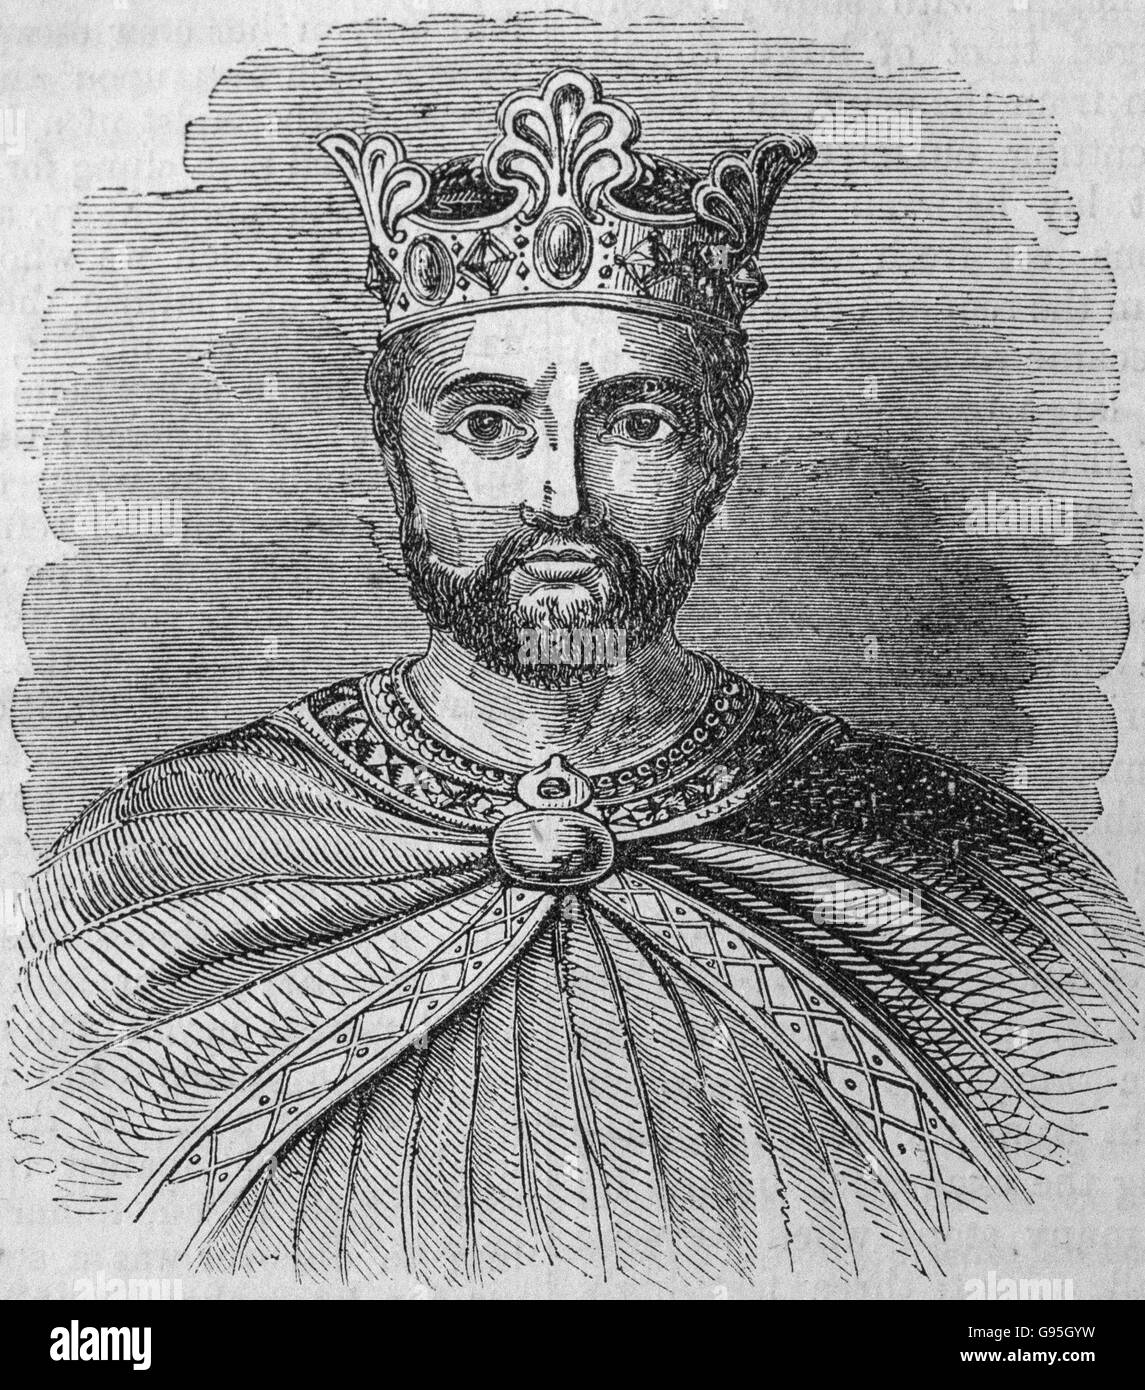 Portrait of Richard I, taken from his tomb at Fontervrault. From a mid 19th century engraving. Stock Photo